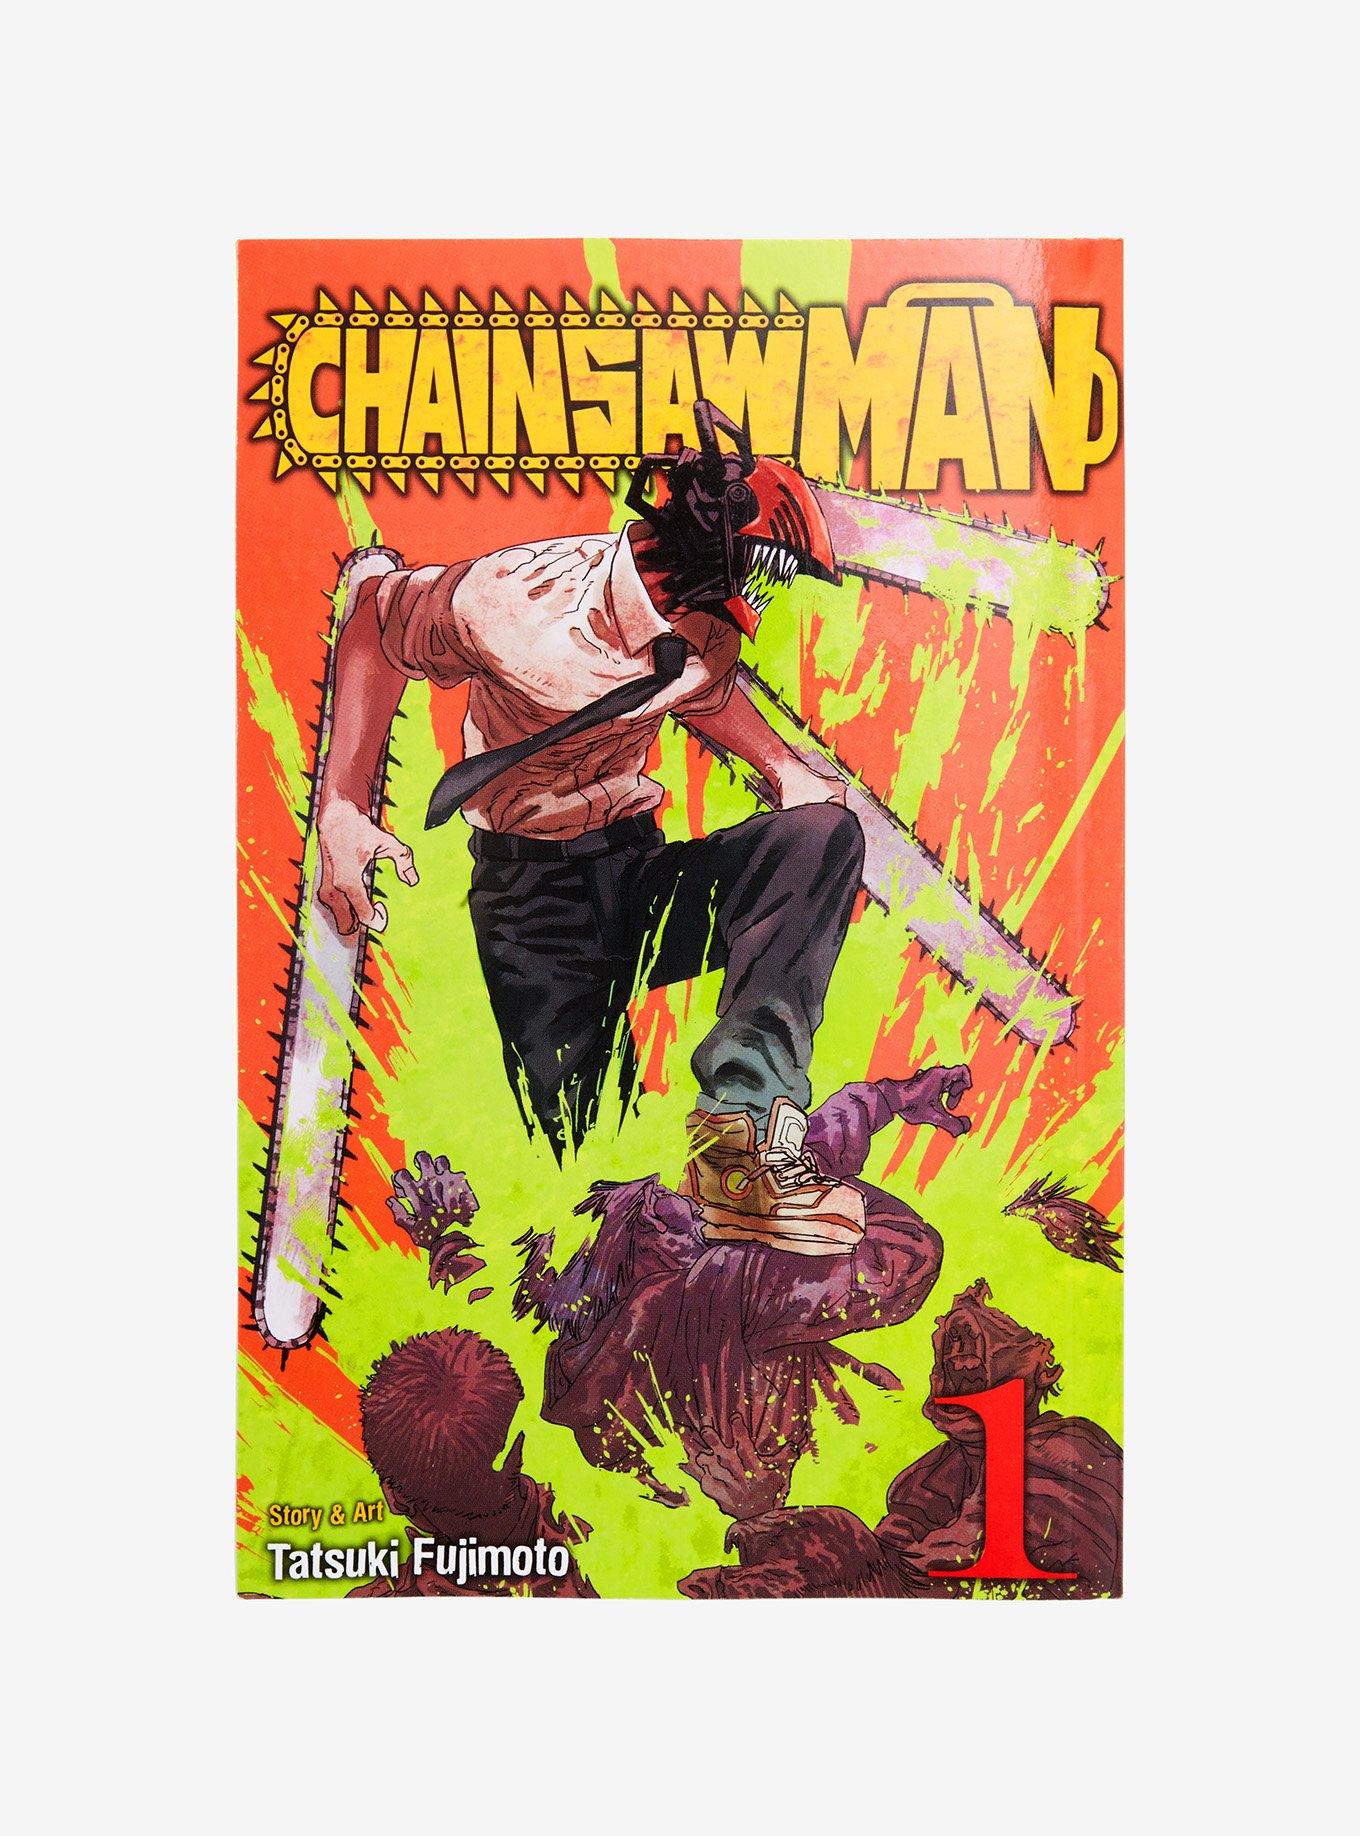 We have your favorites from Chainsaw Man here at BoxLunch! Hurry